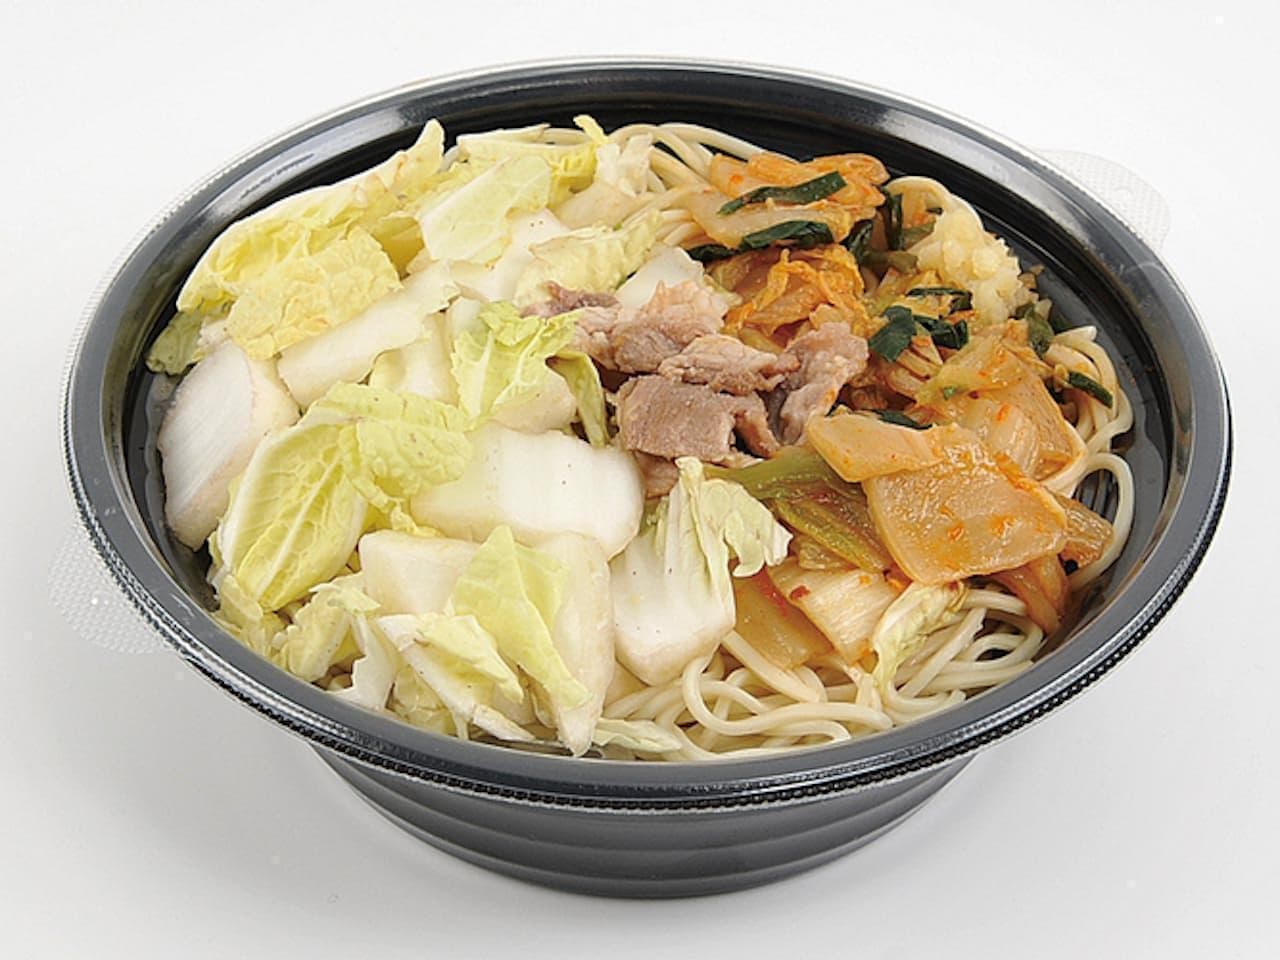 Ministop New Product "Spicy Shoyu Ramen with Pork Bone and Chinese Cabbage Taste".